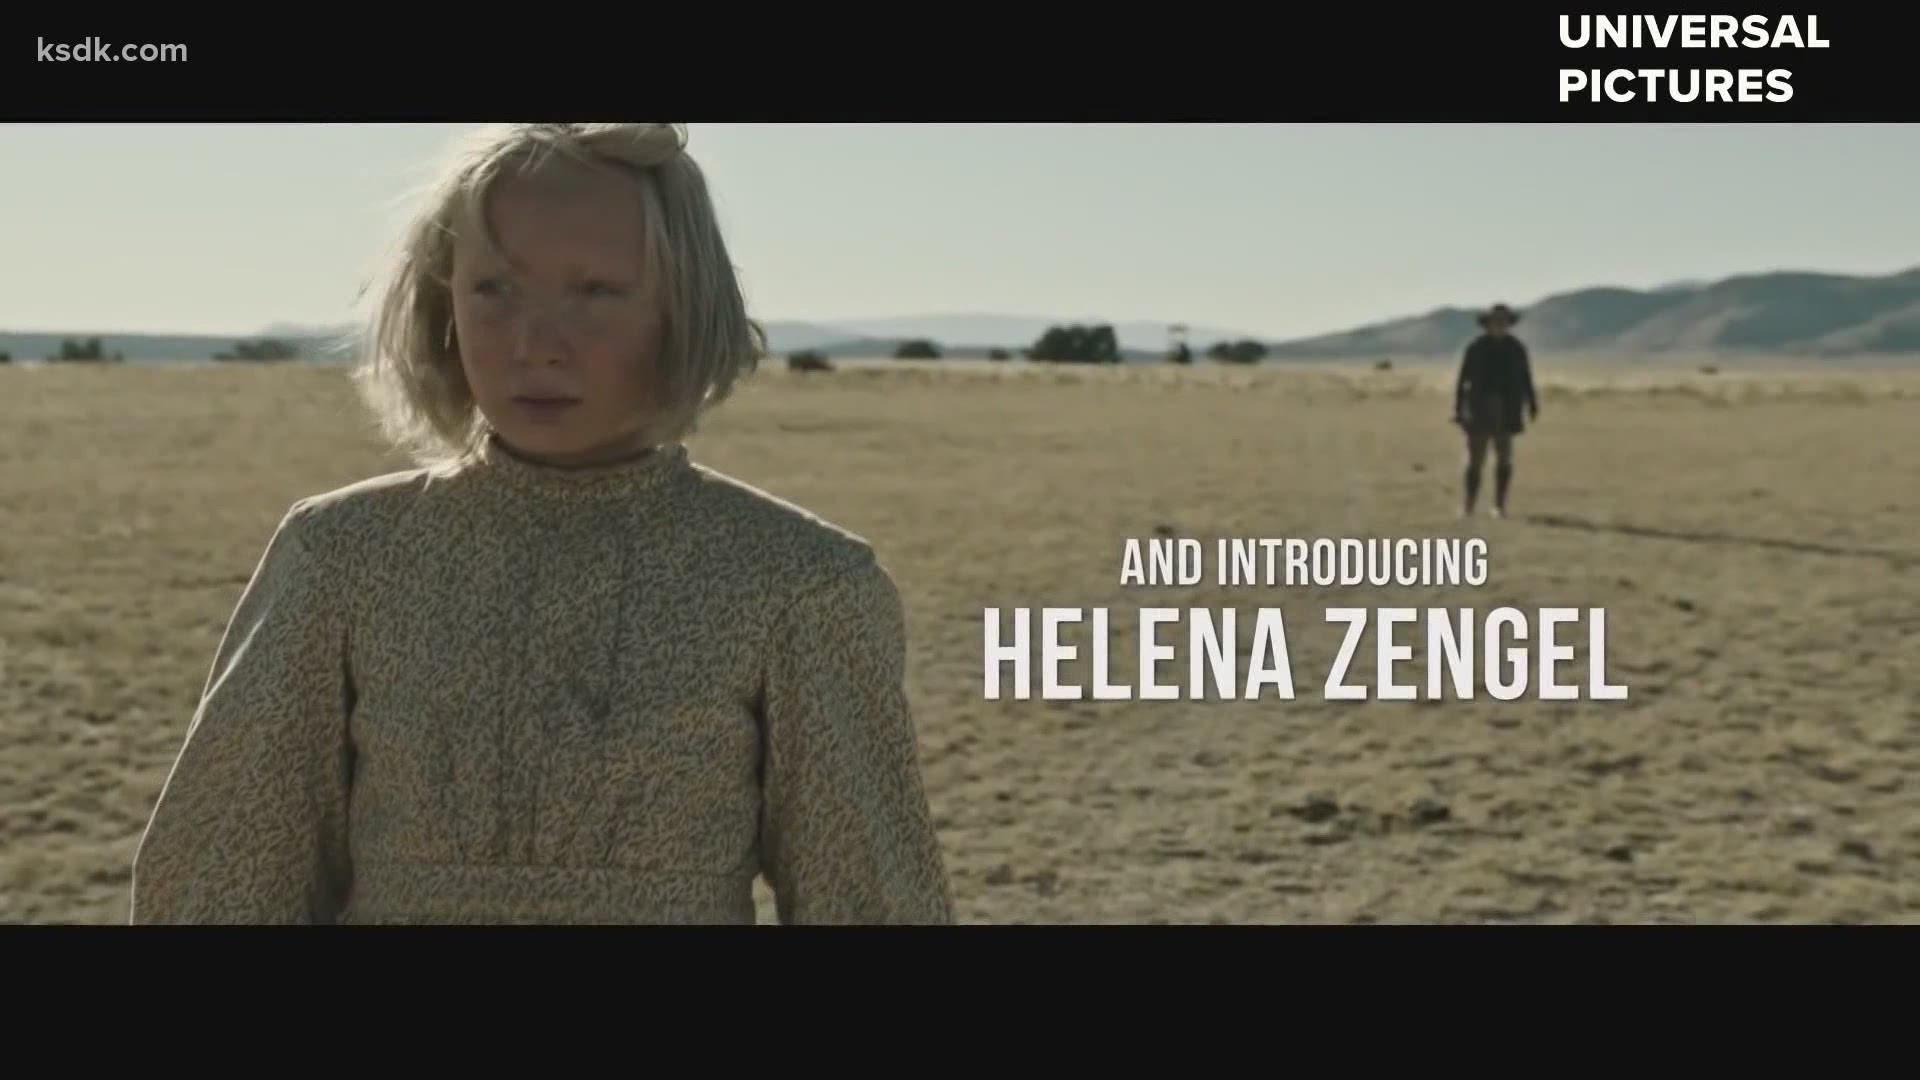 5 On Your Side Film Critic Dan Buffa speaks with Tom Hanks’ young co-star, Helena Zengel, about the new film.